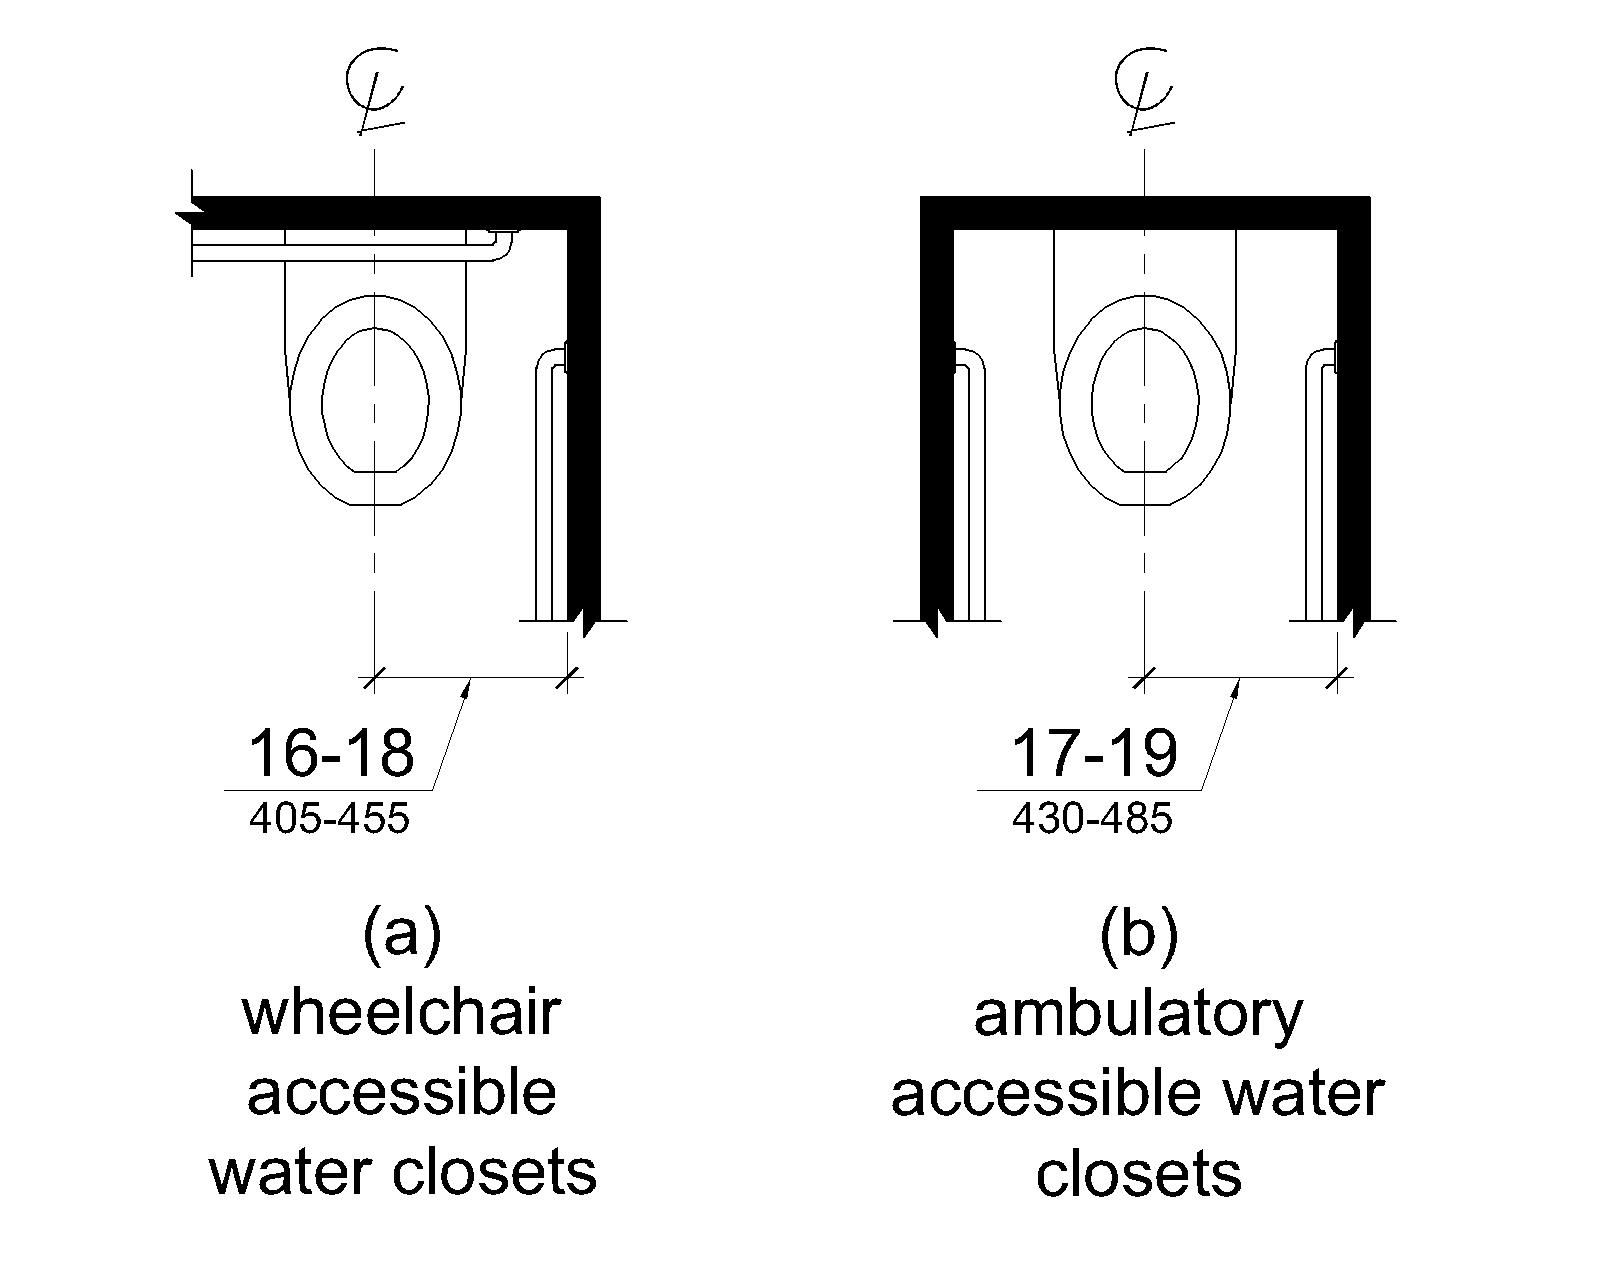 Figure V604.2 Water Closet Location. Figure (a) shows a wheelchair accessible water closet, with space on one side, and figure (b) shows an ambulatory accessible water closet, with stall walls and grab bars on both sides. The water closet centerline is shown to be 16 to 18 inches (405 to 455 mm) from the side wall.